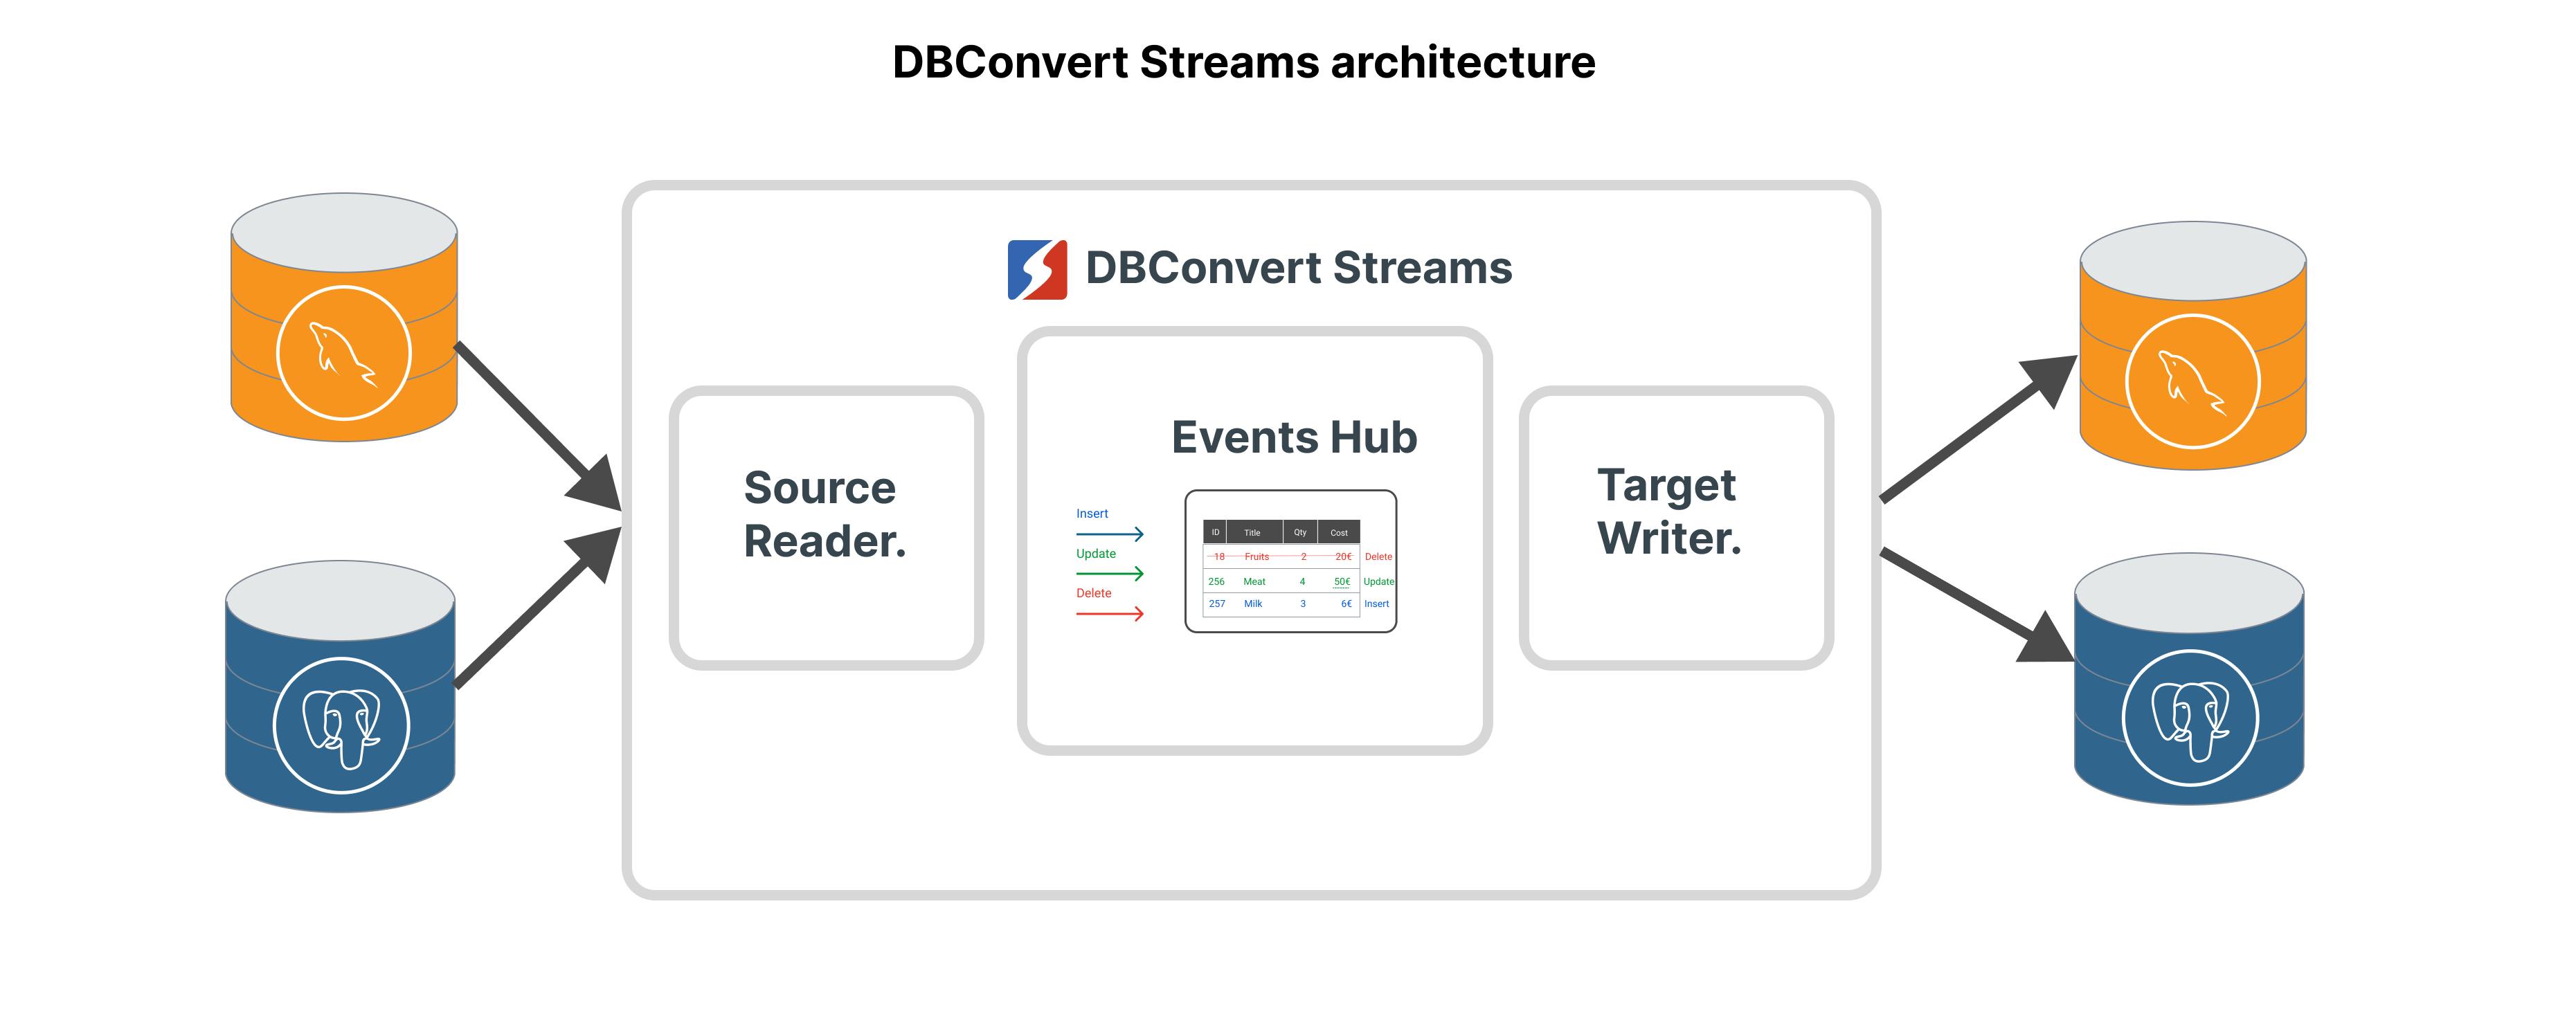 Debezium vs DBConvert Streams: Which Offers Superior Performance in Data Streaming?